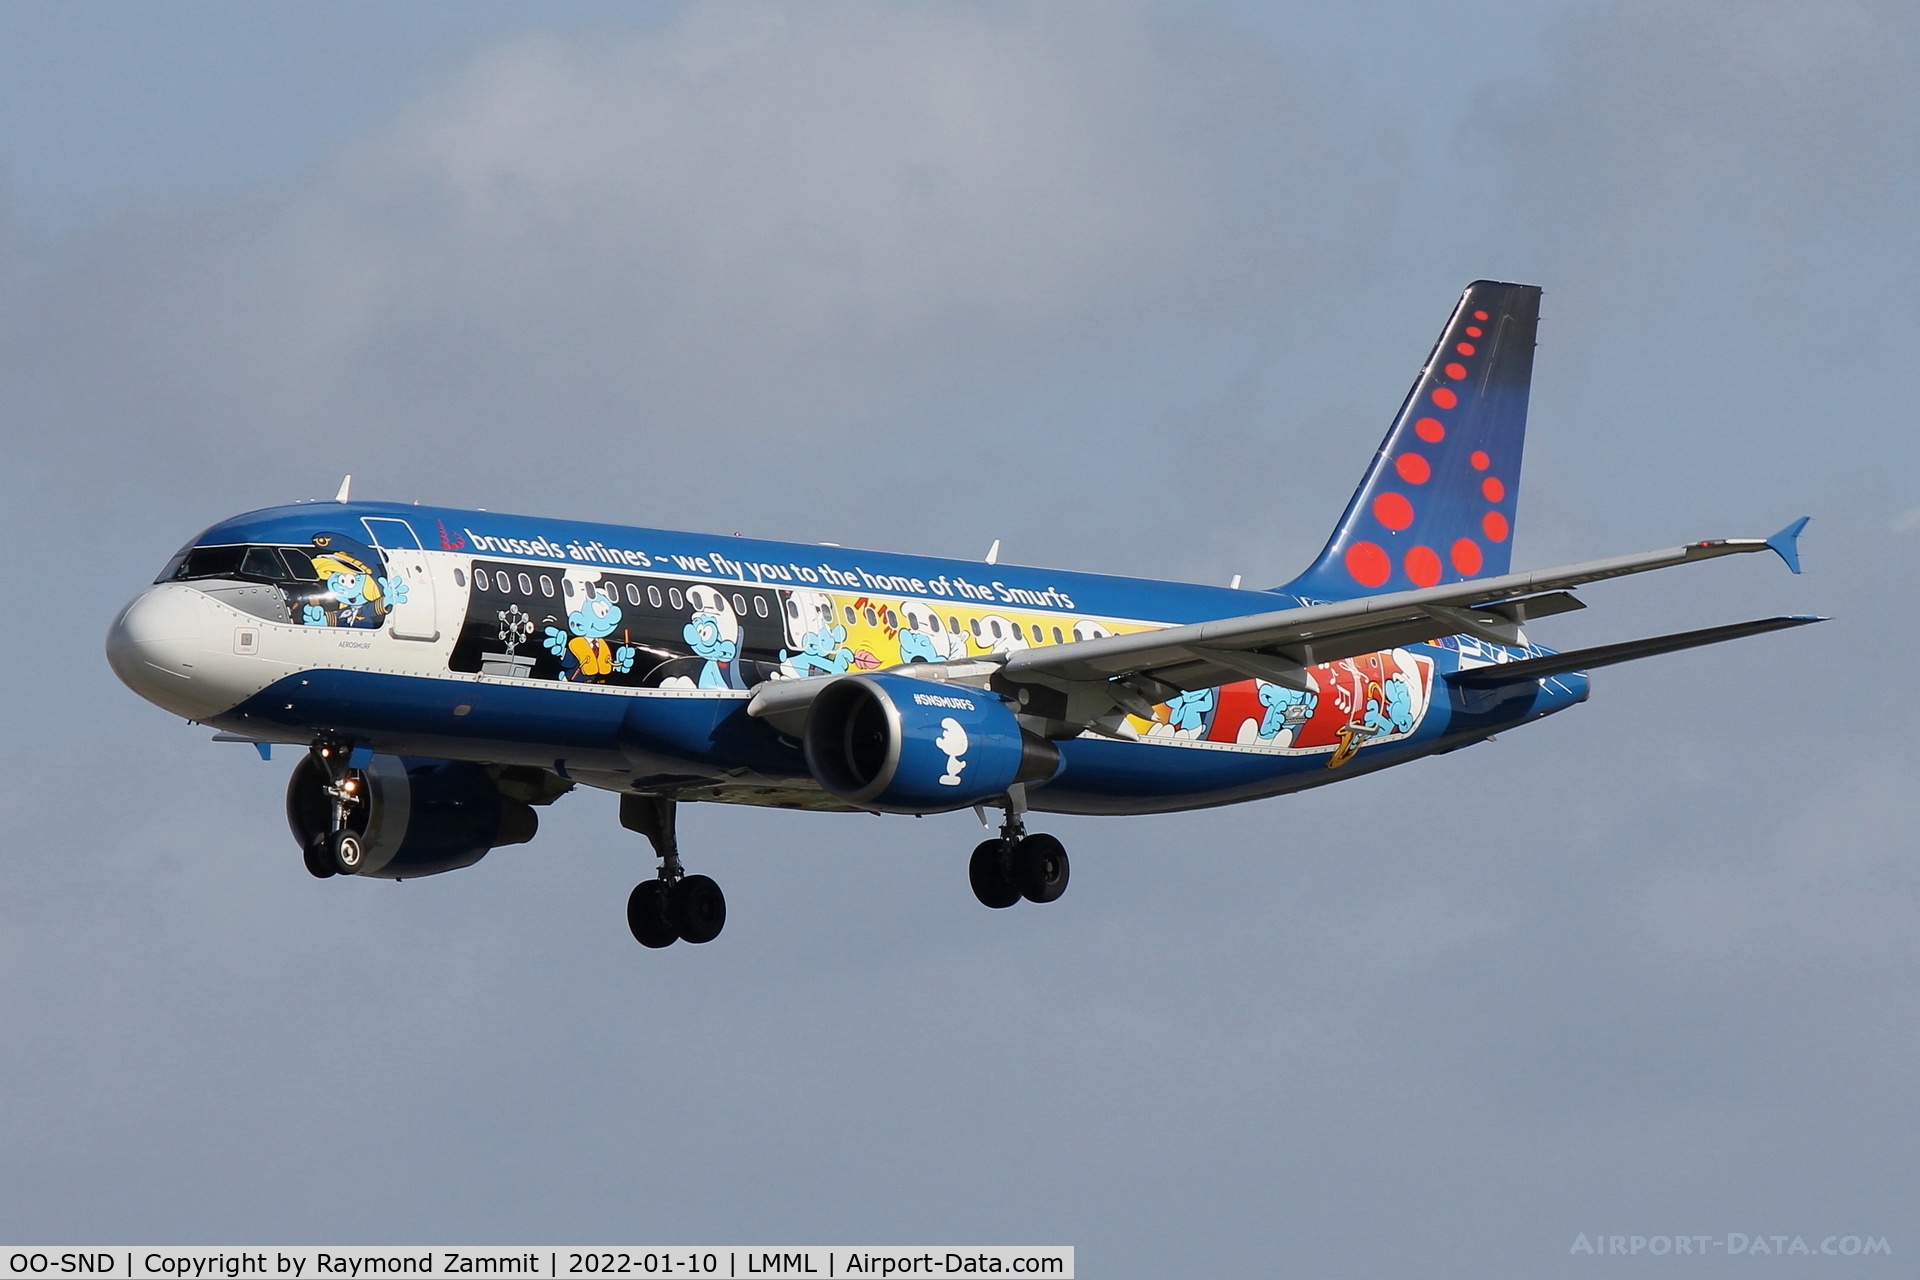 OO-SND, 2002 Airbus A320-214 C/N 1838, A320 OO-SND Brussels Airlines in special livery